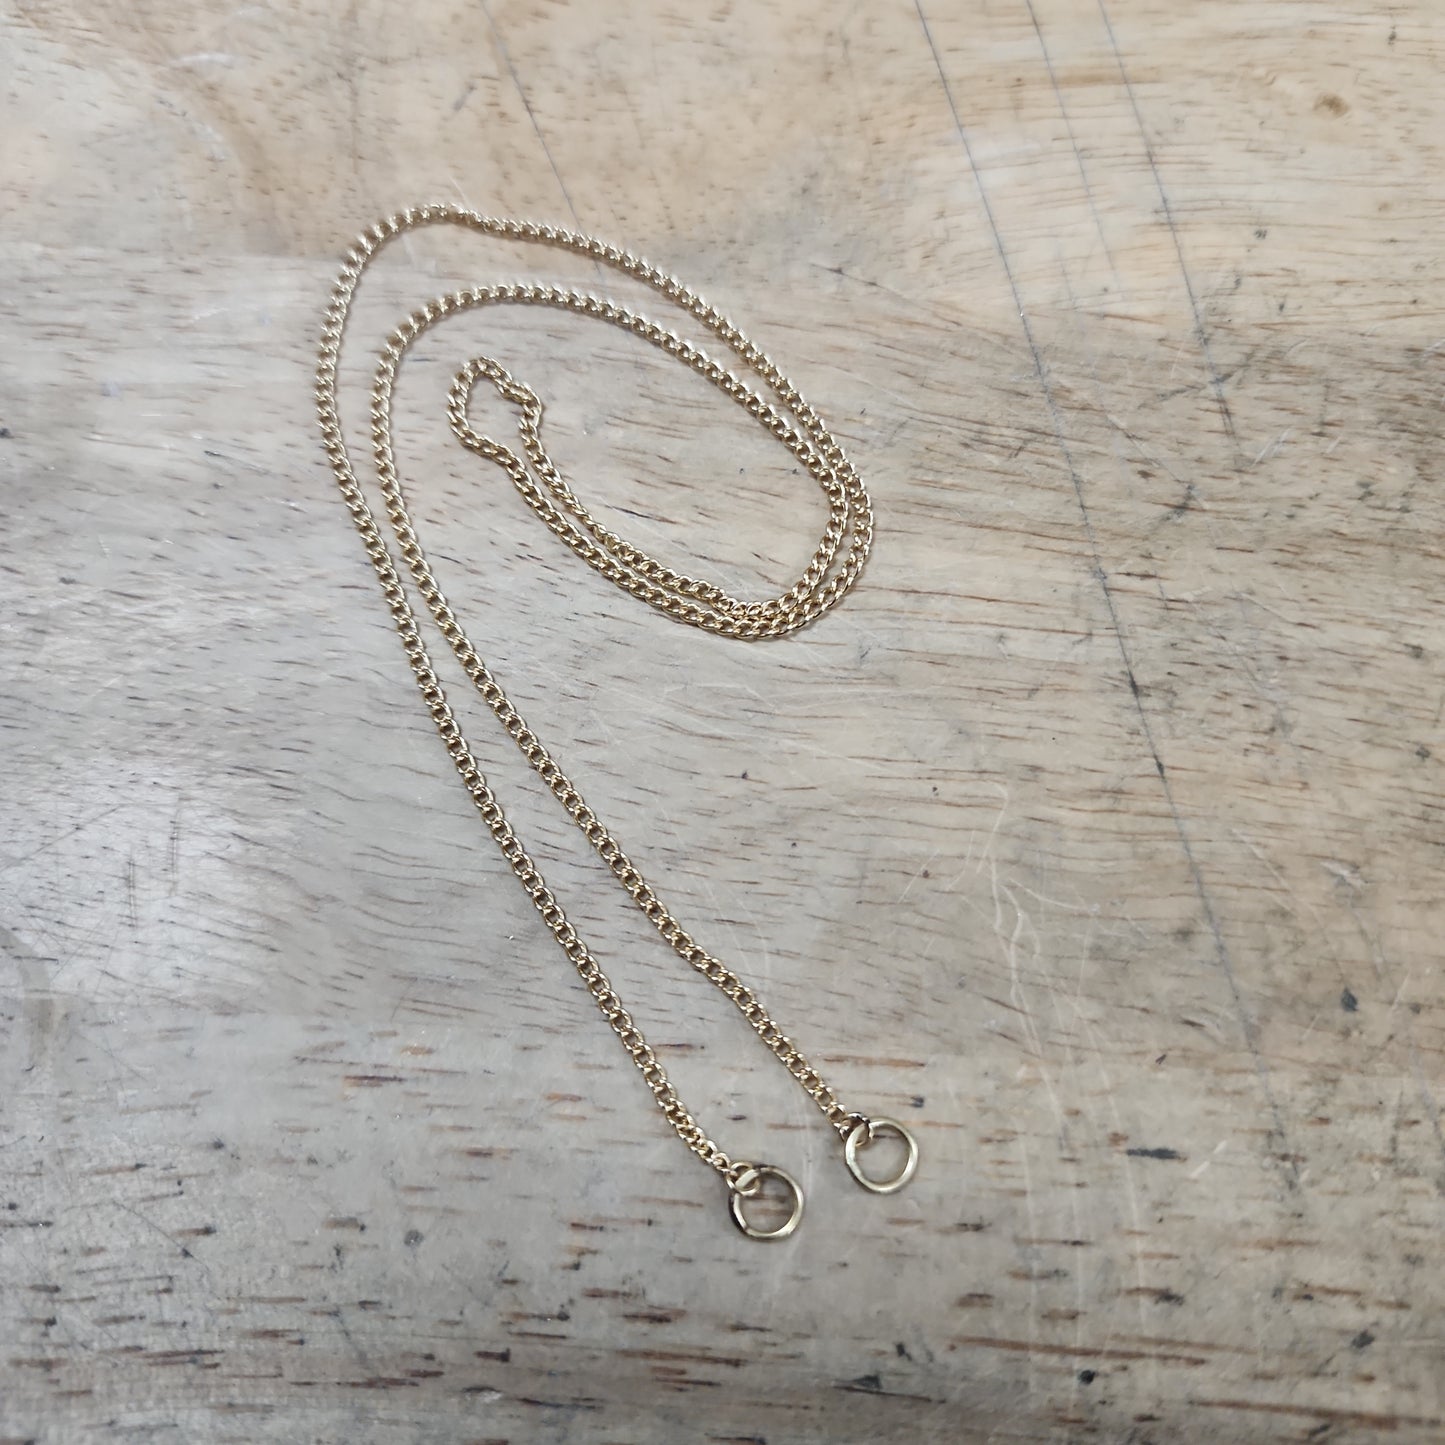 Small Curb Chain Necklace